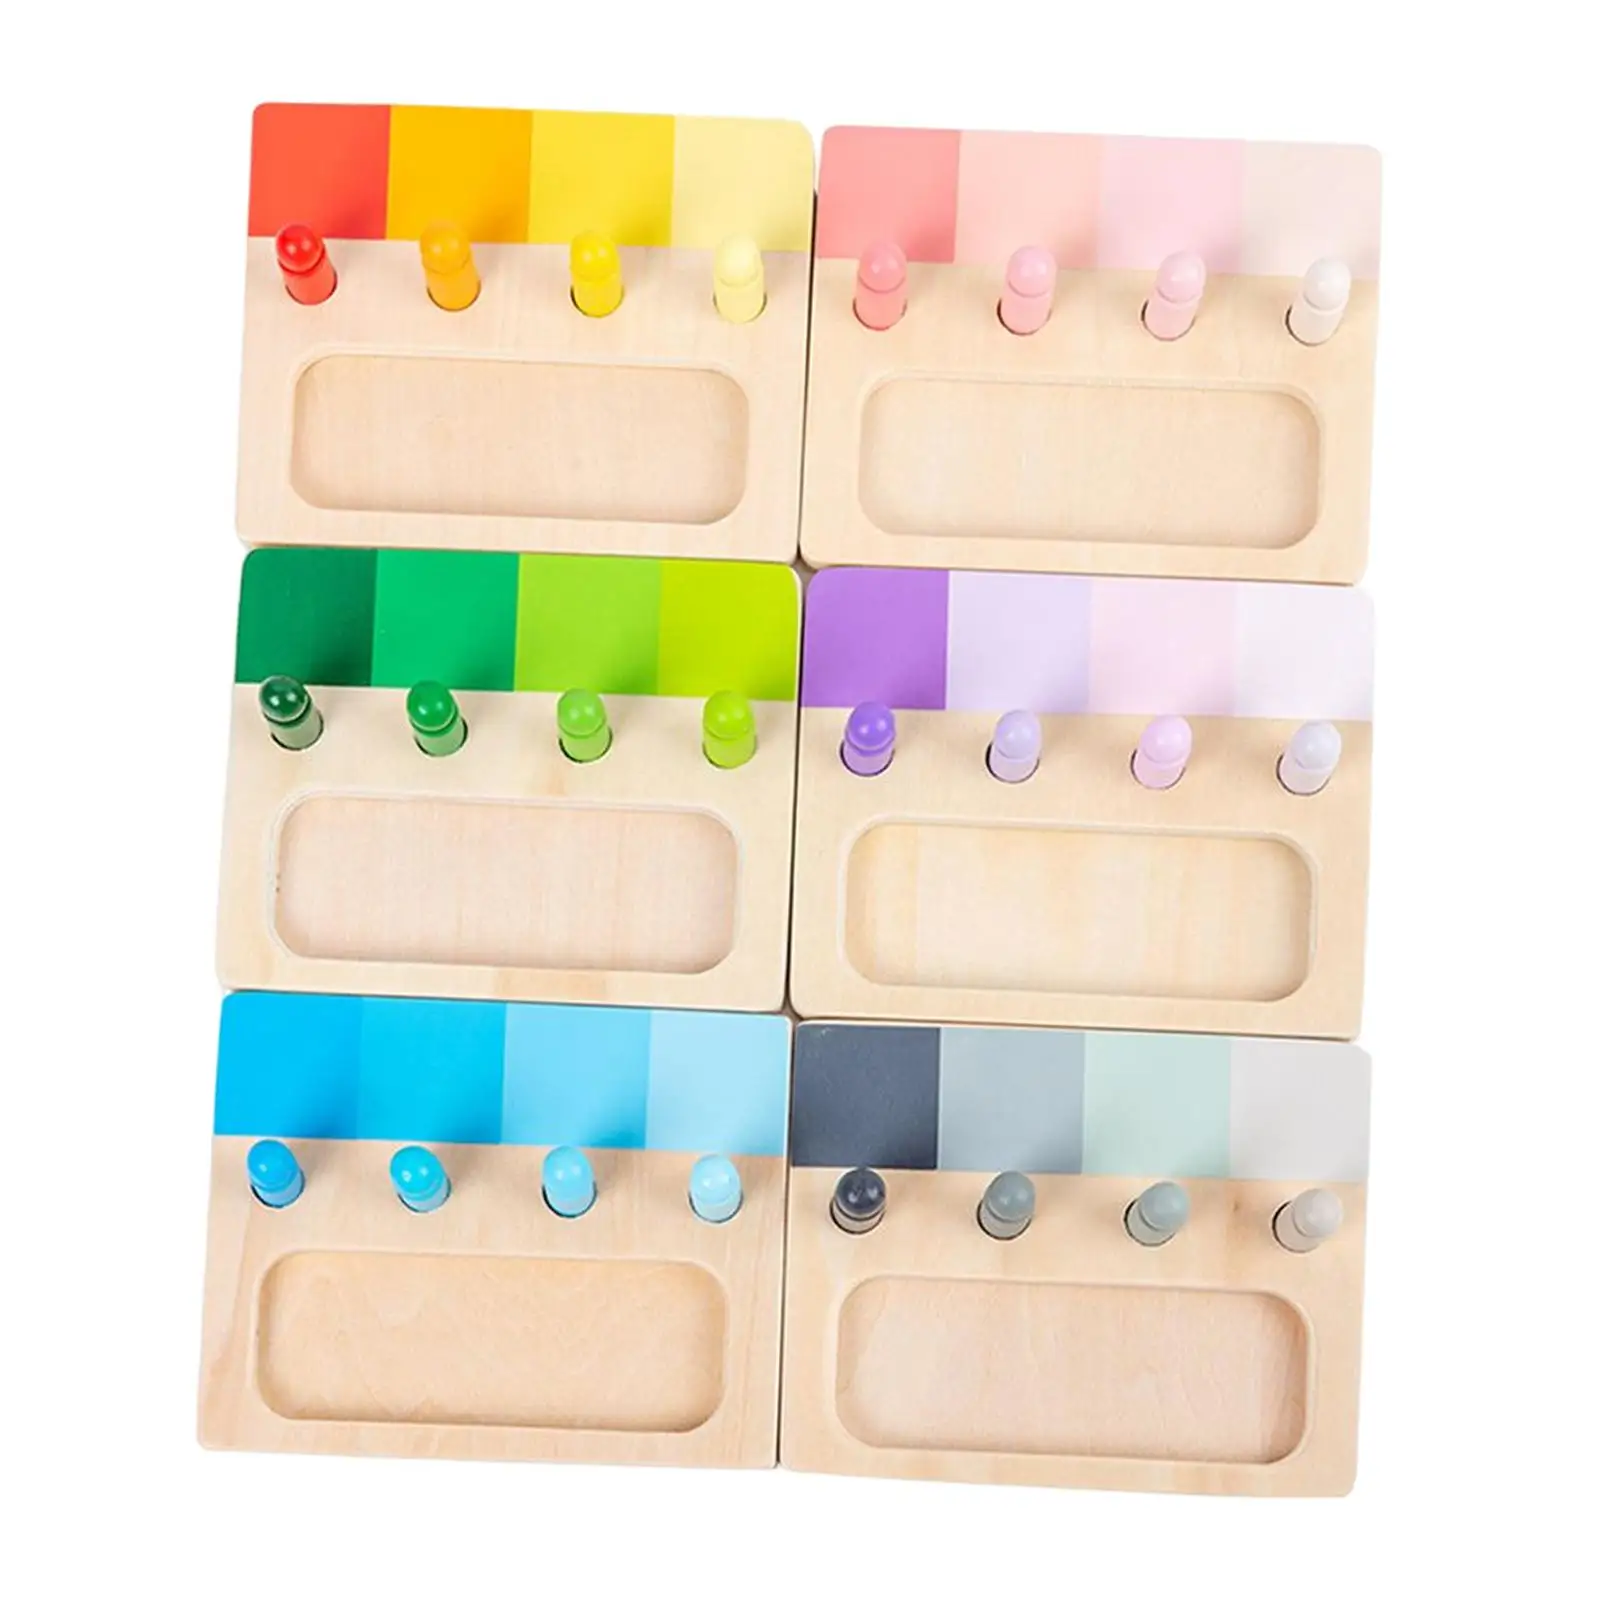 6x Color Resemblance Sorting Task Devlopment Toy Educational for Exercise